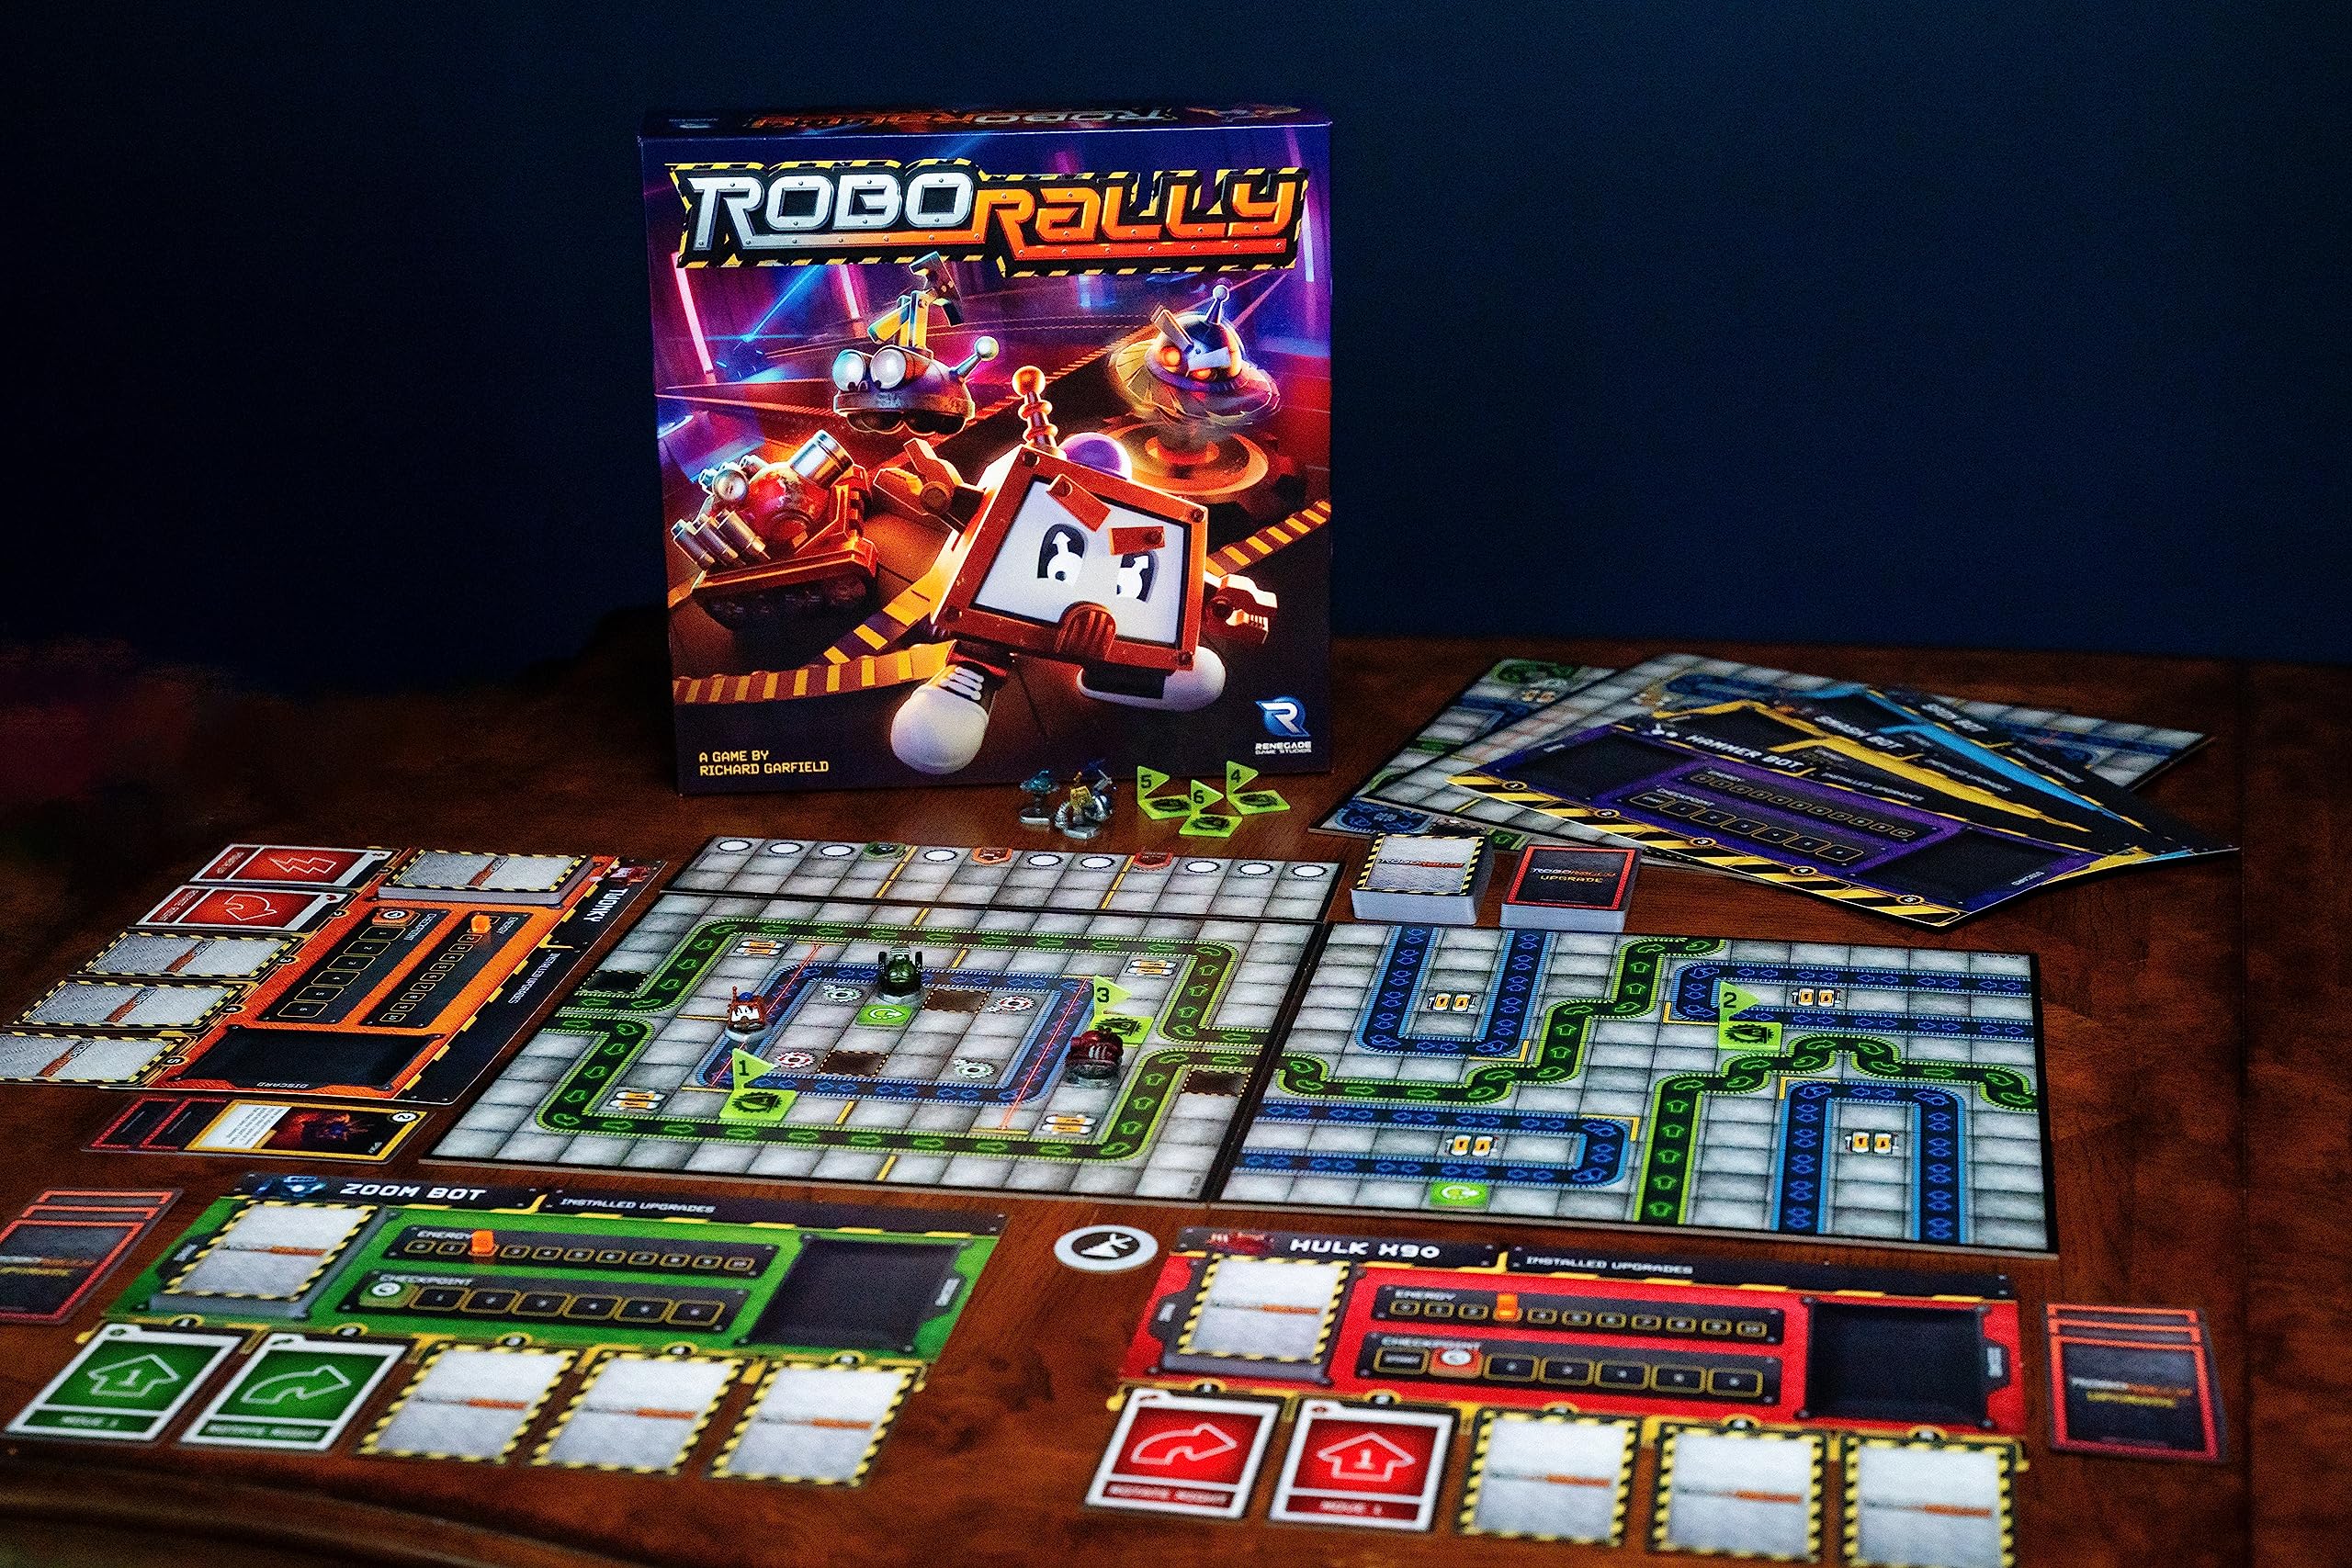 Renegade Game Studios | Robo Rally | Strategy Board Game for 2-6 Players, Ages 12+ with 6 Pre-Painted Robot Miniatures